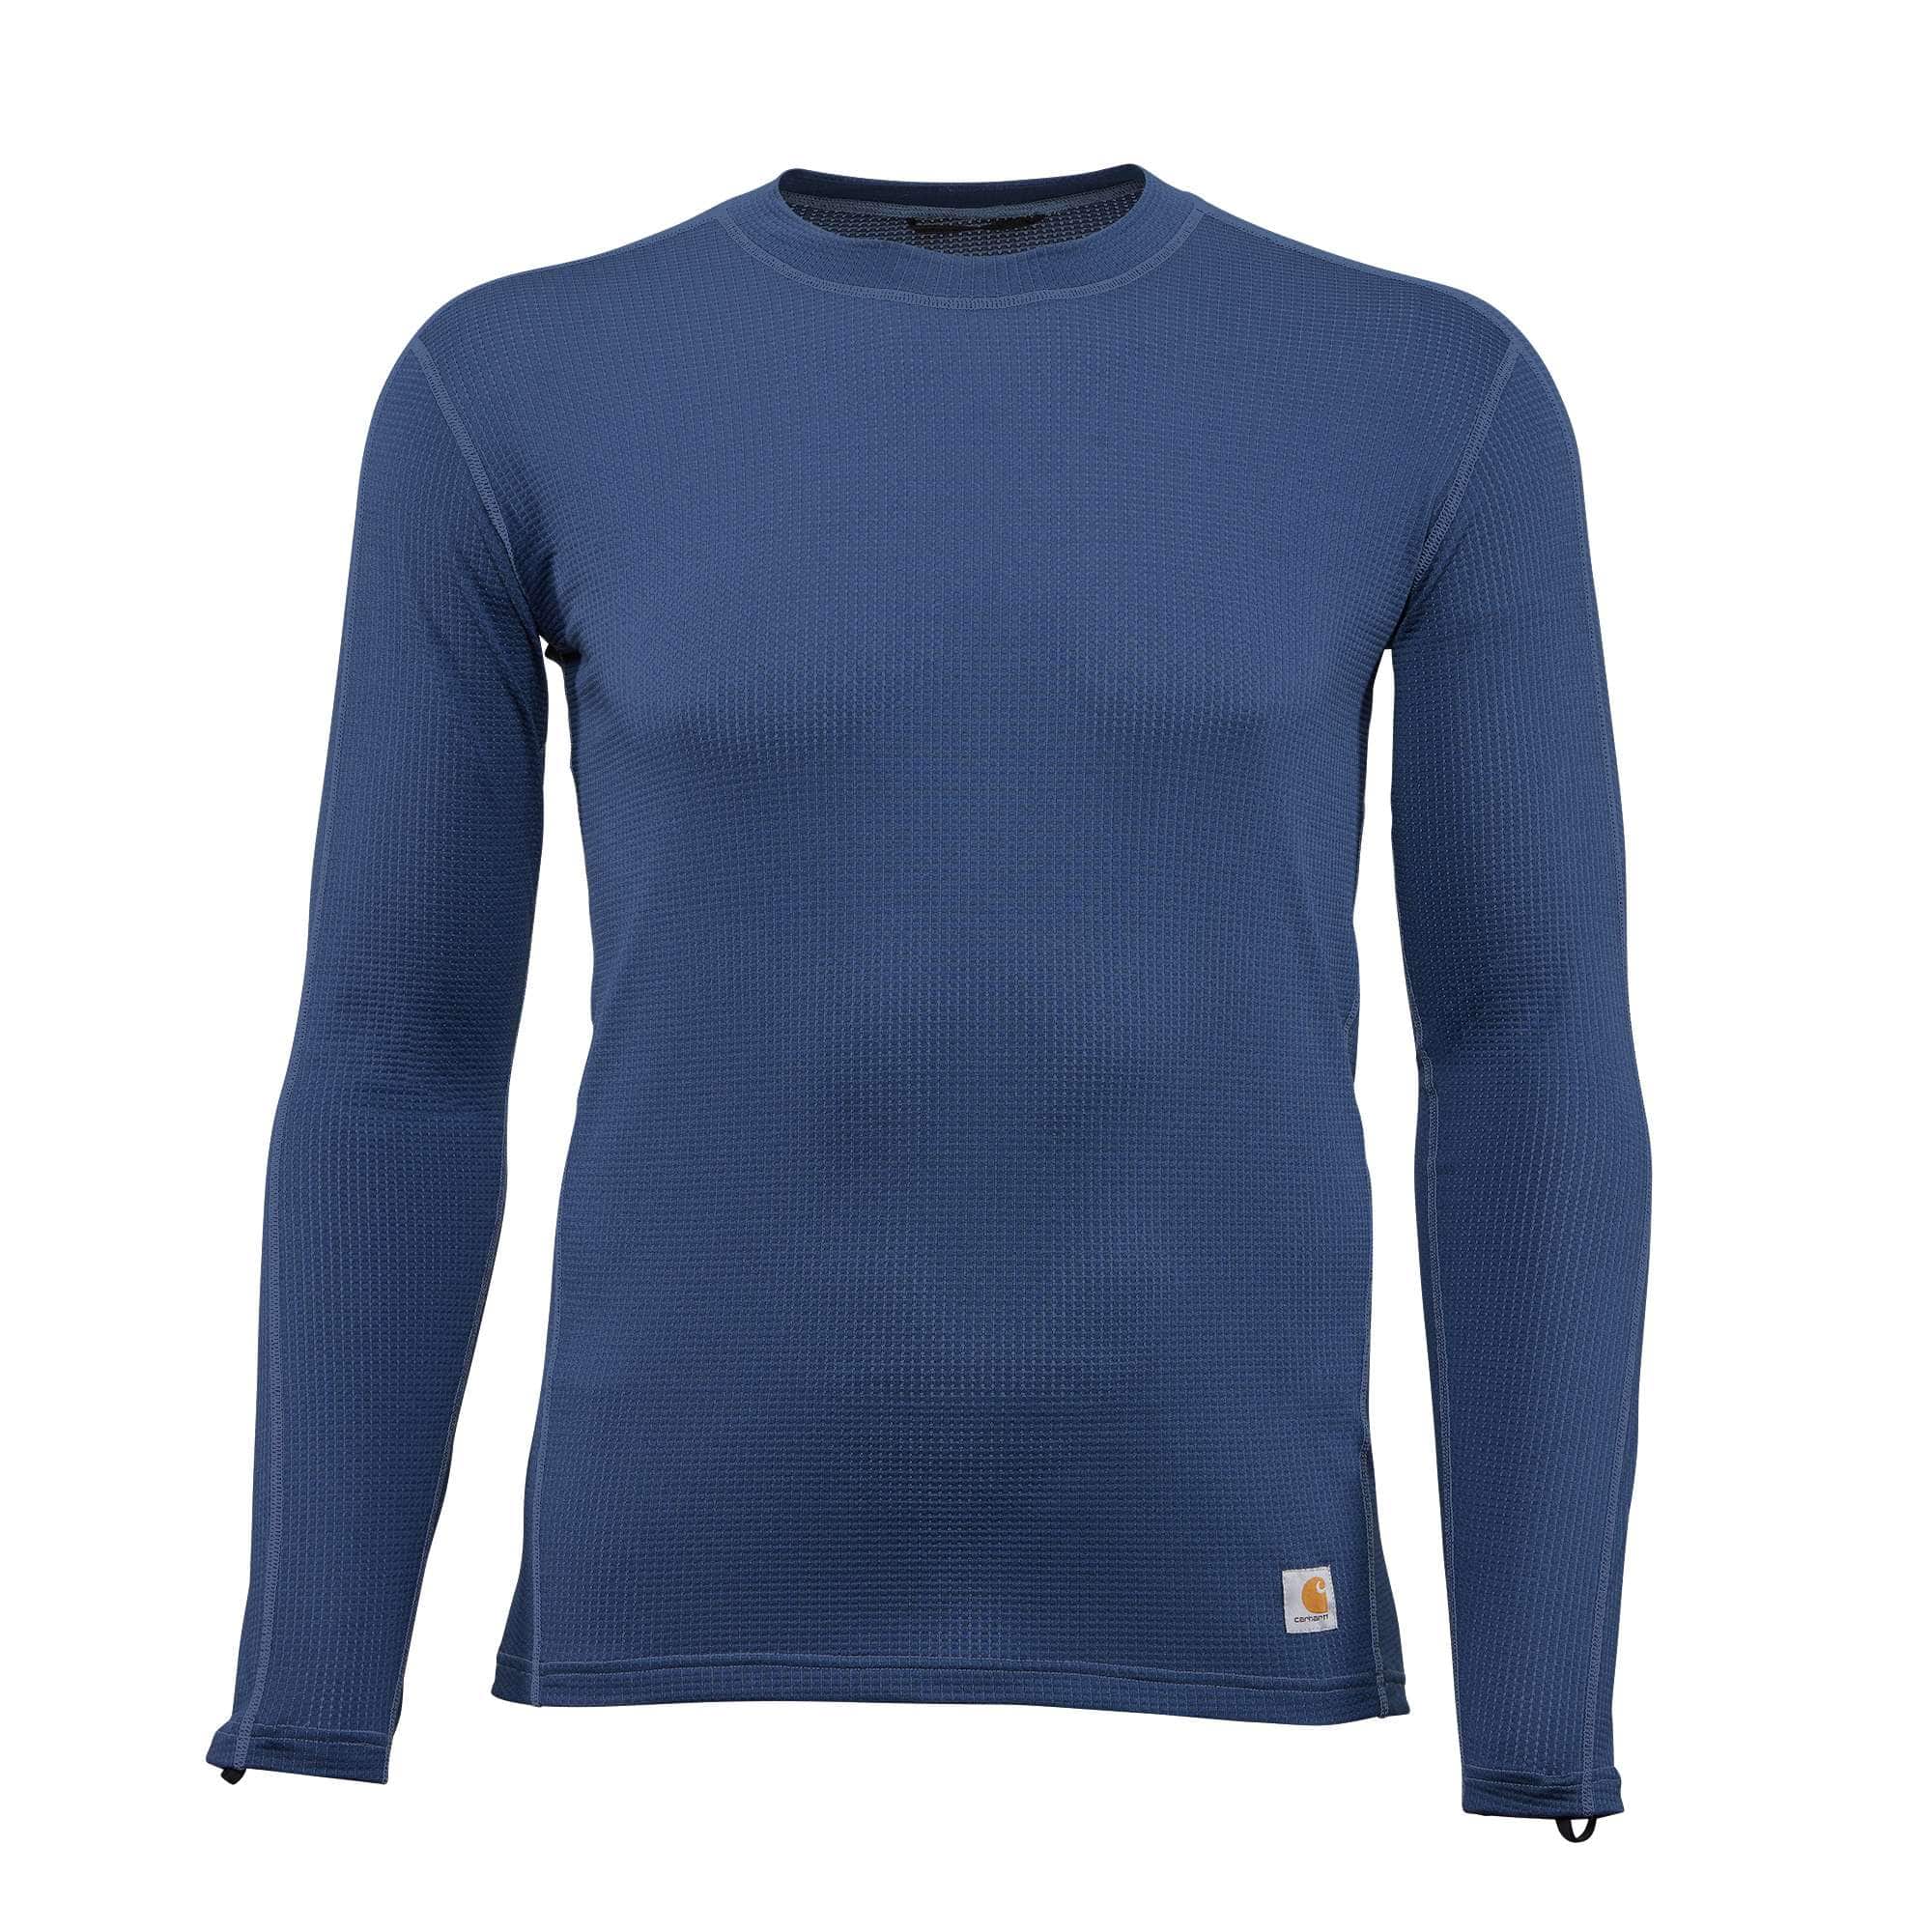 Men's Solid Color Long Sleeve Thermal Shirts Lightweight Thermal Underwear  Tops